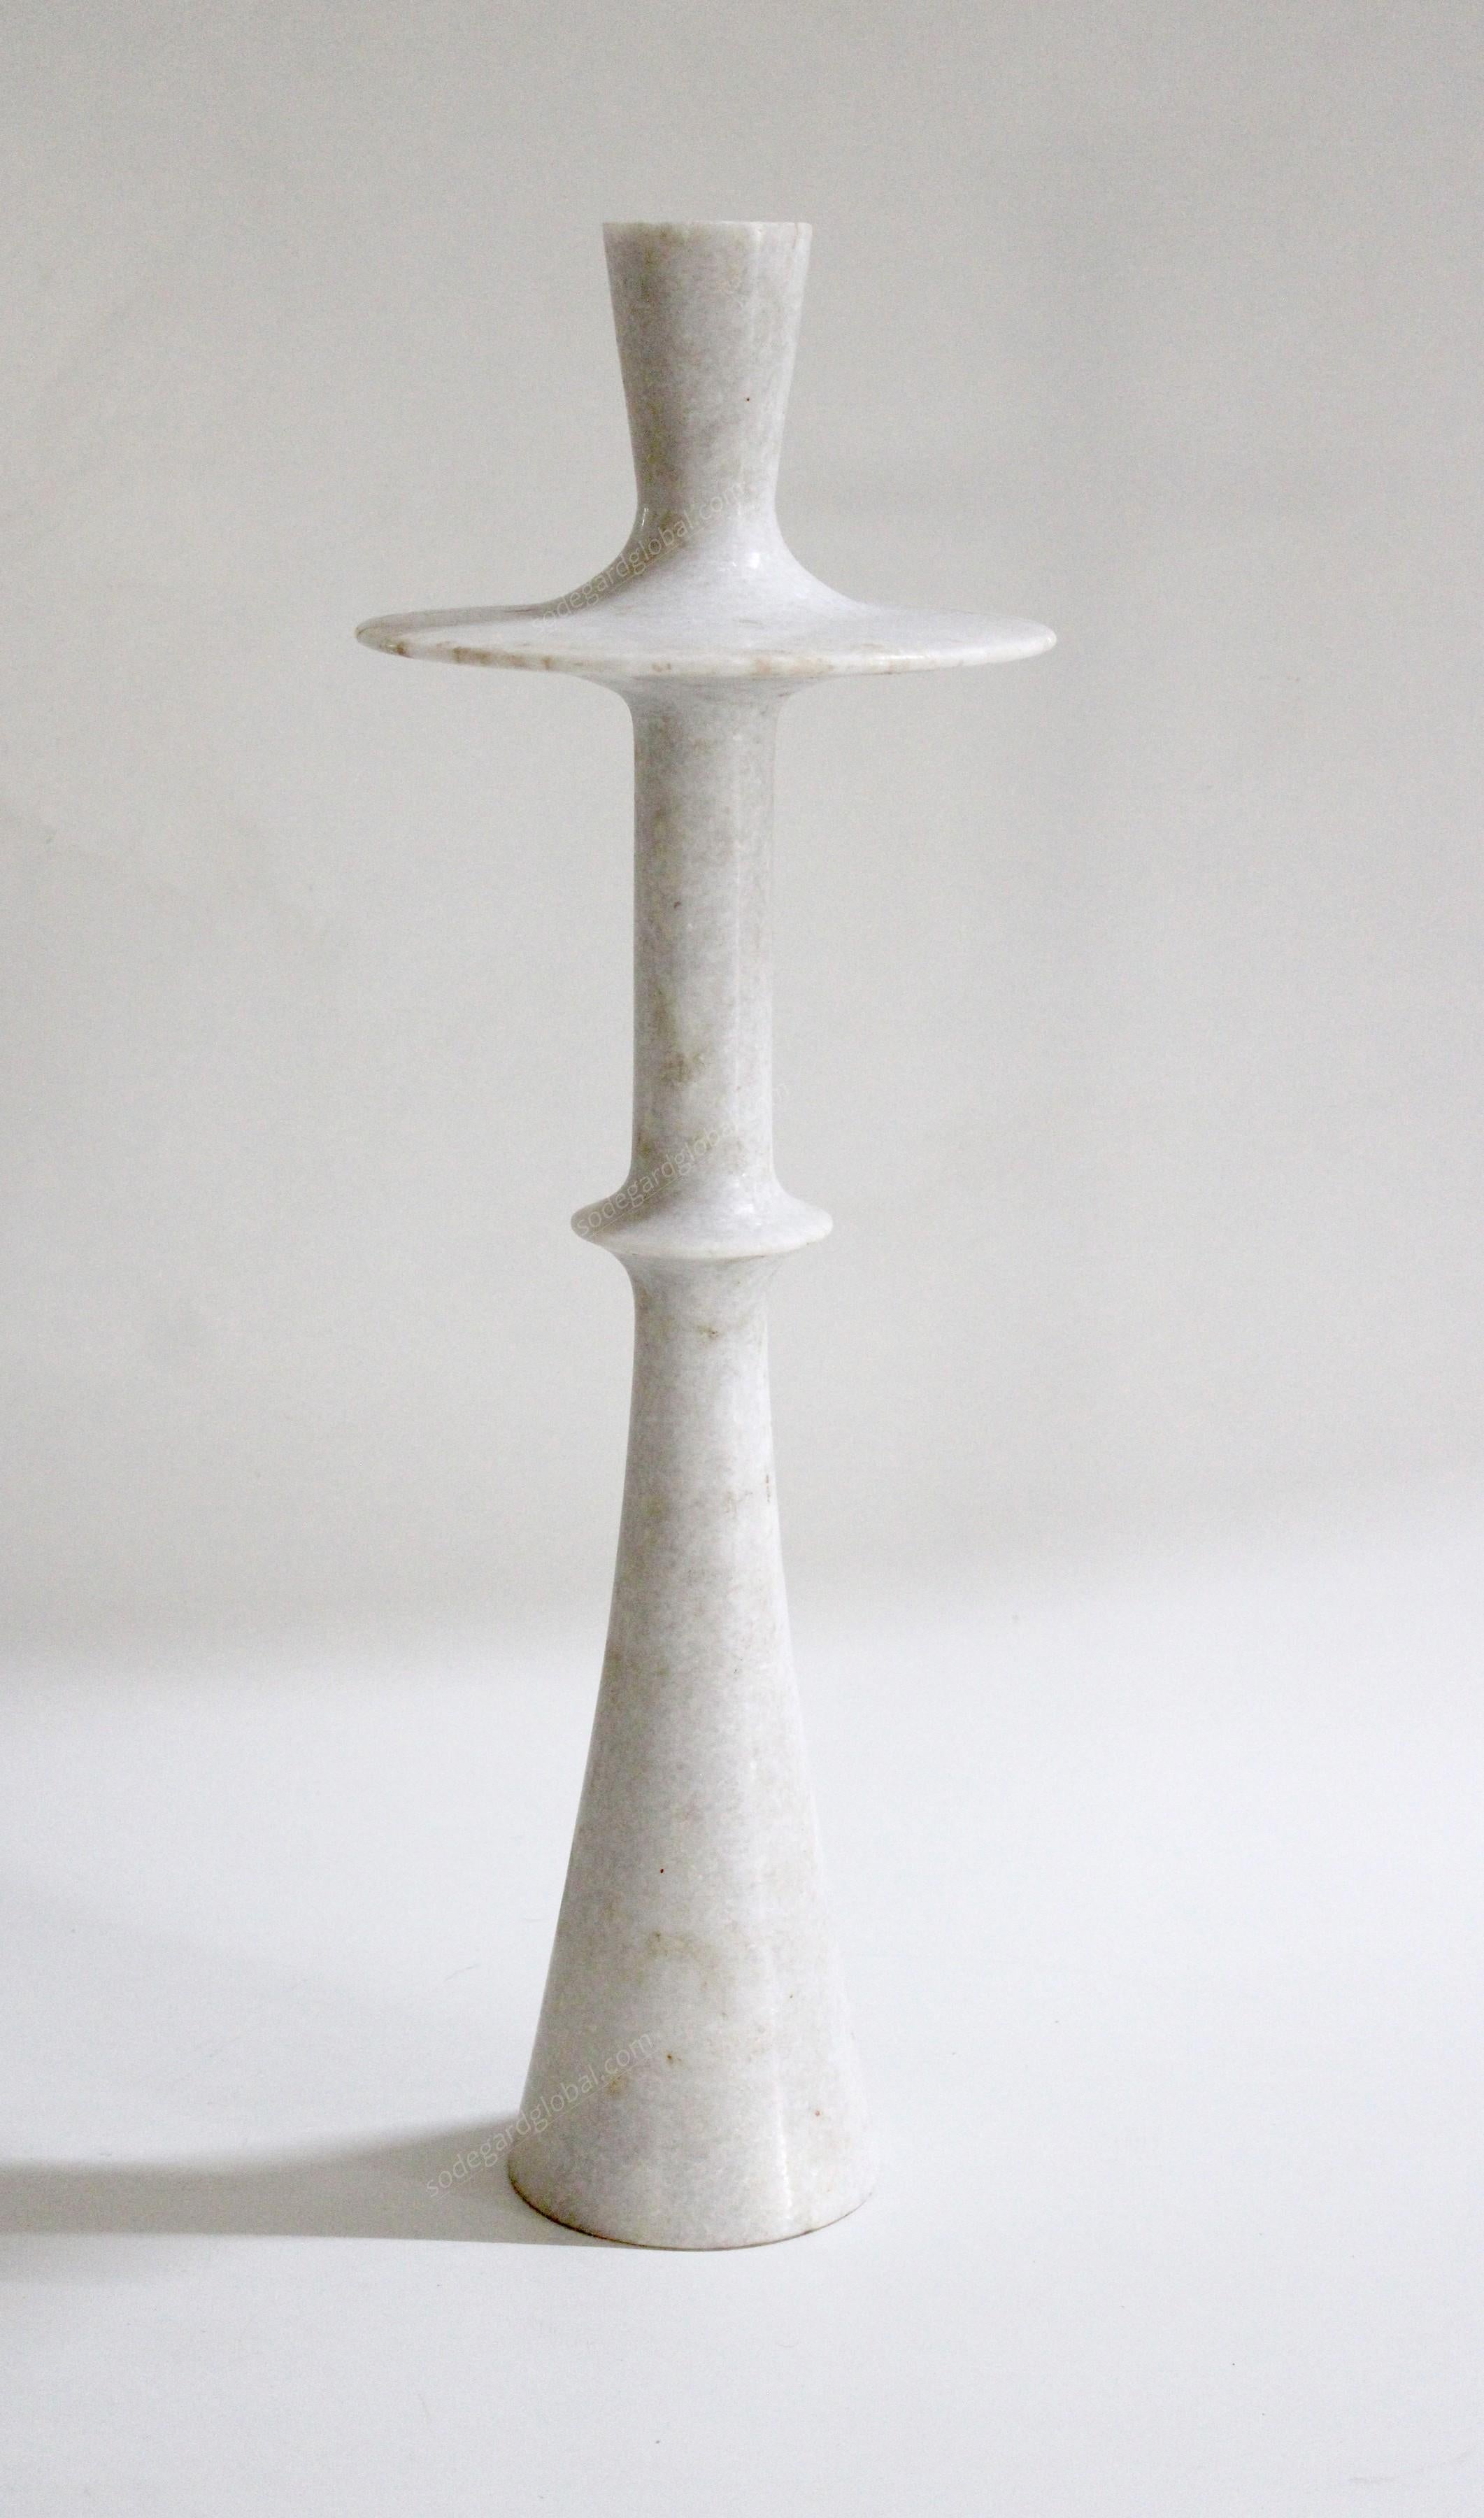 Paul Mathieu designed these elegant candlesticks for Stephanie Odegard Co. Ltd. Solid pieces of marble are turned to create these delicate designs namely Ove, Flute, Plat I and Plat II.

Candlesticks Plate II
Size-  8” x 8” x 23” H.
Materials -